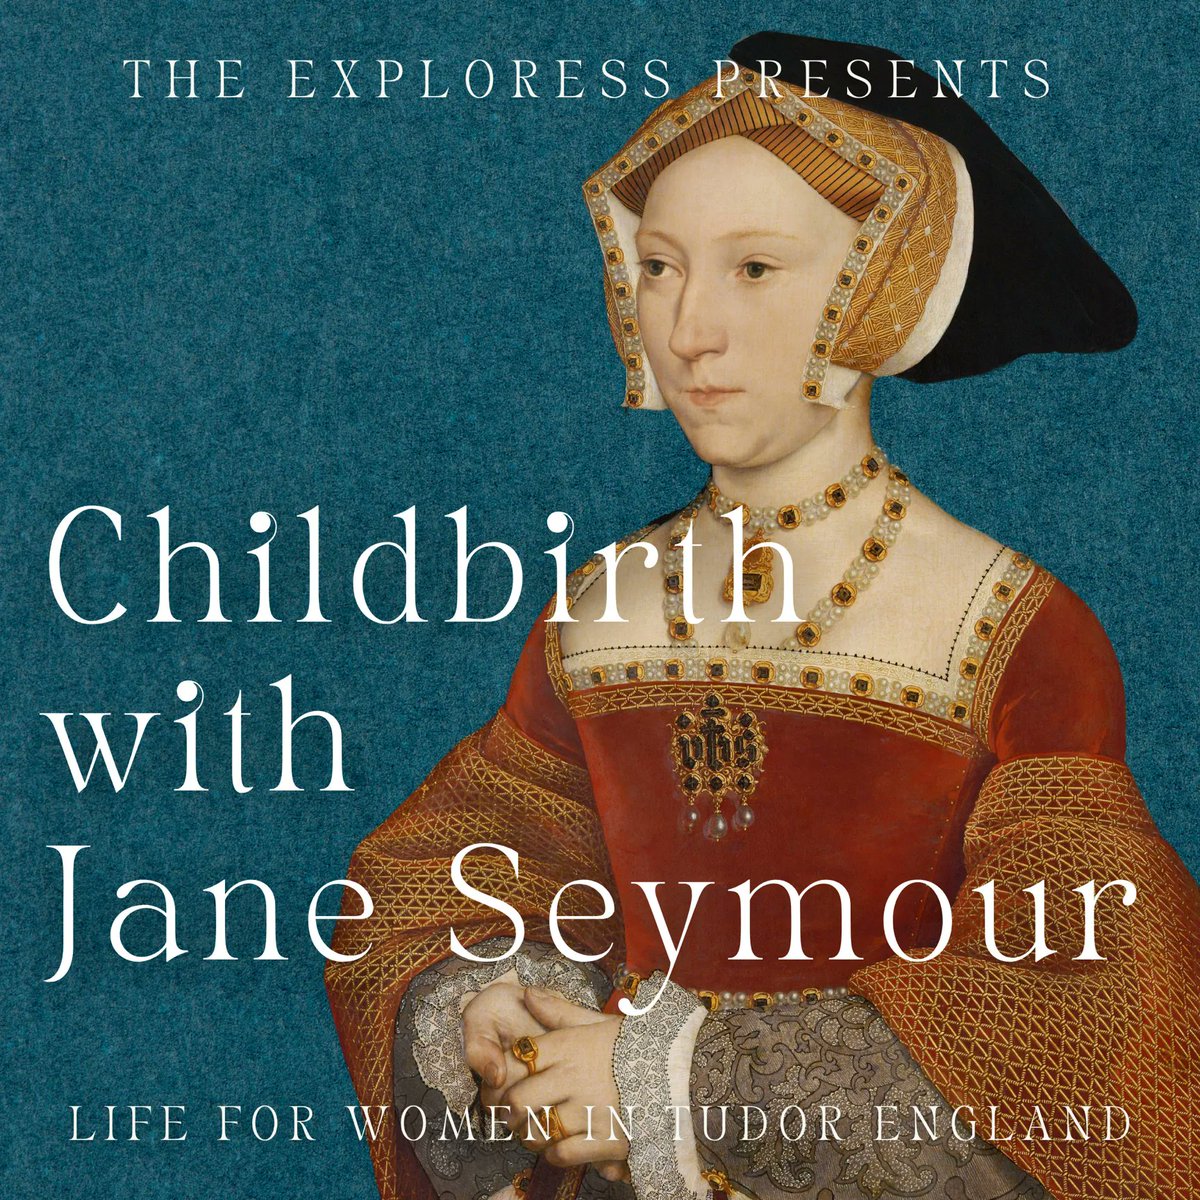 New episode alert! Let’s get down to some Tudor-era babymaking business with queen Jane Seymour as our fabulous guide.